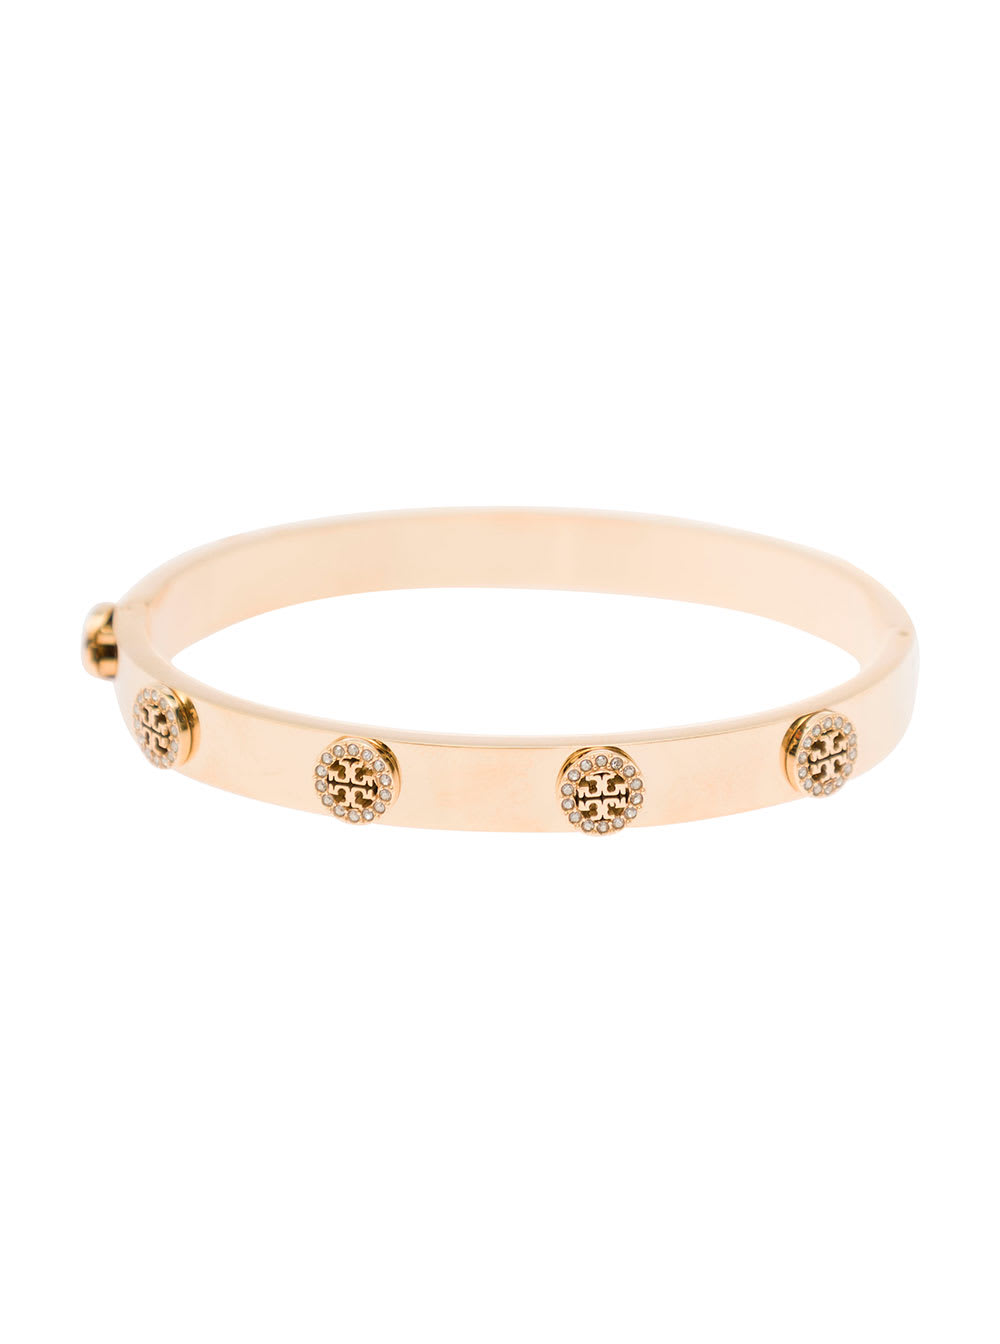 Shop Tory Burch Gold Tone Bracelet With Logo Studs In Stainless Steel And Cubic Zirconia Woman In Metallic